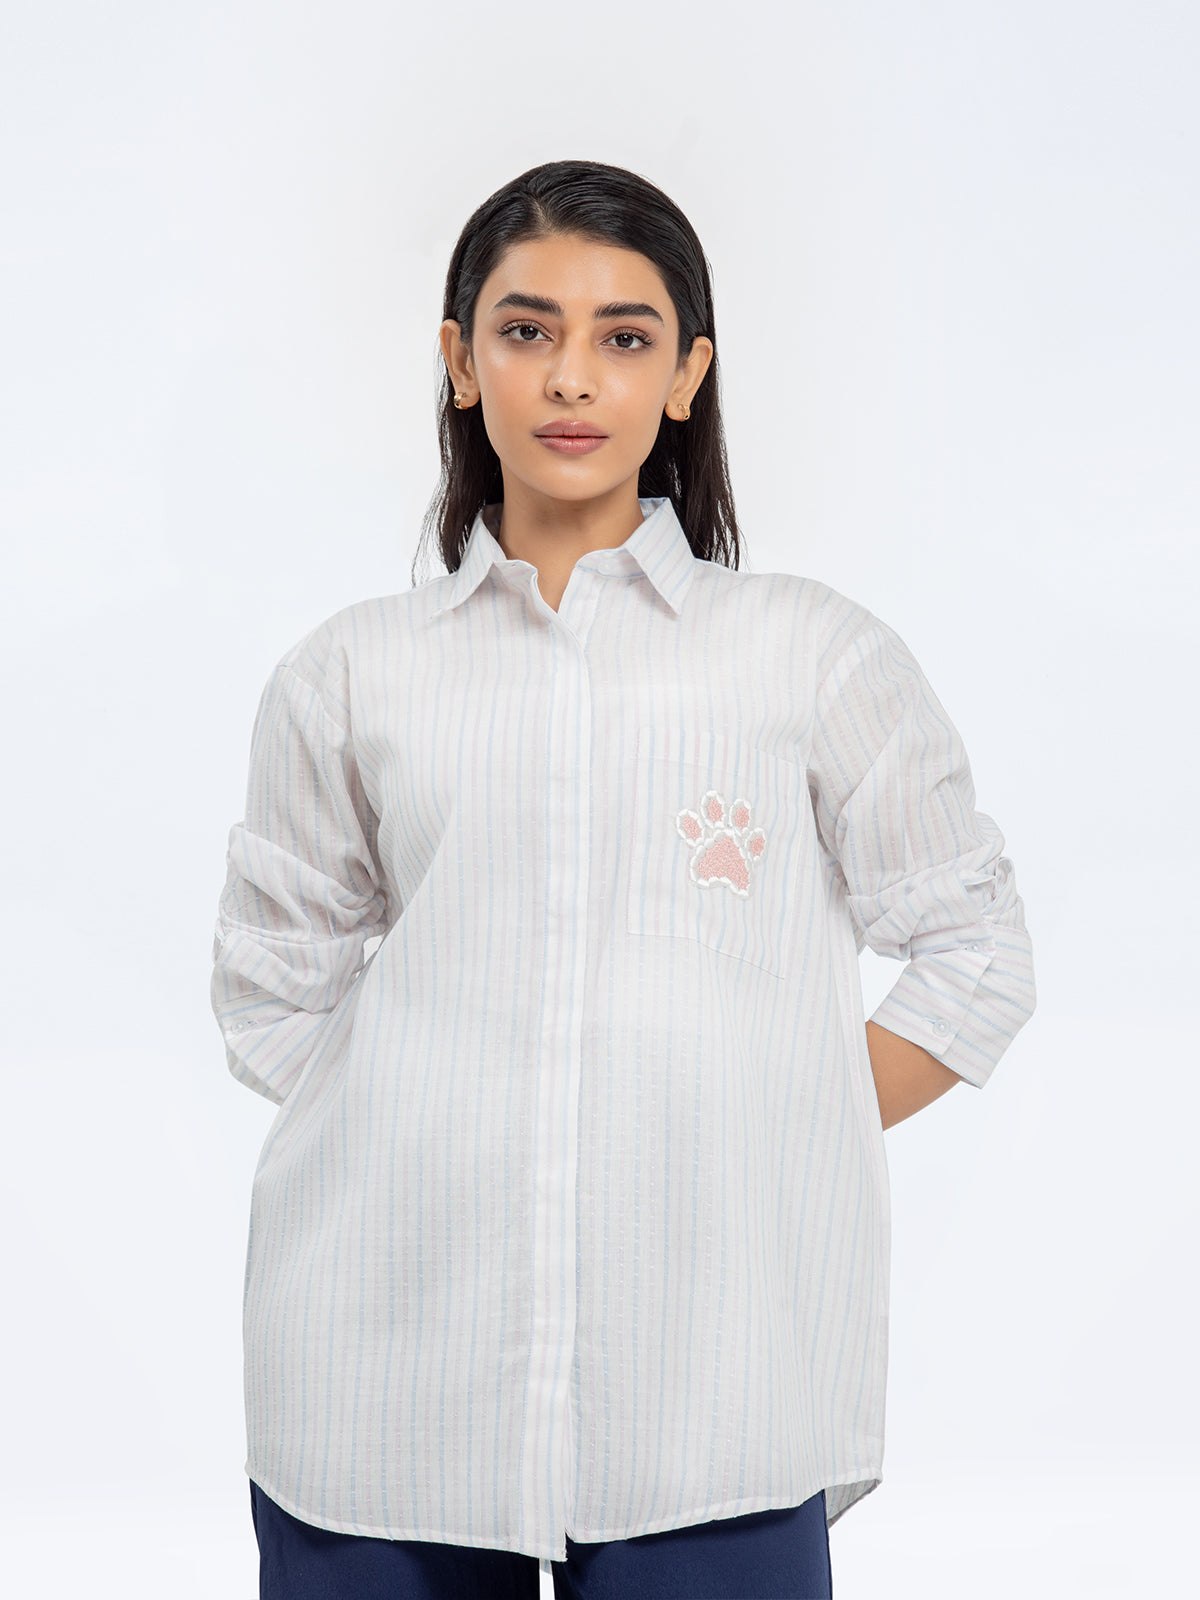 Relaxed Fit Button Up Shirt - FWTS24-046